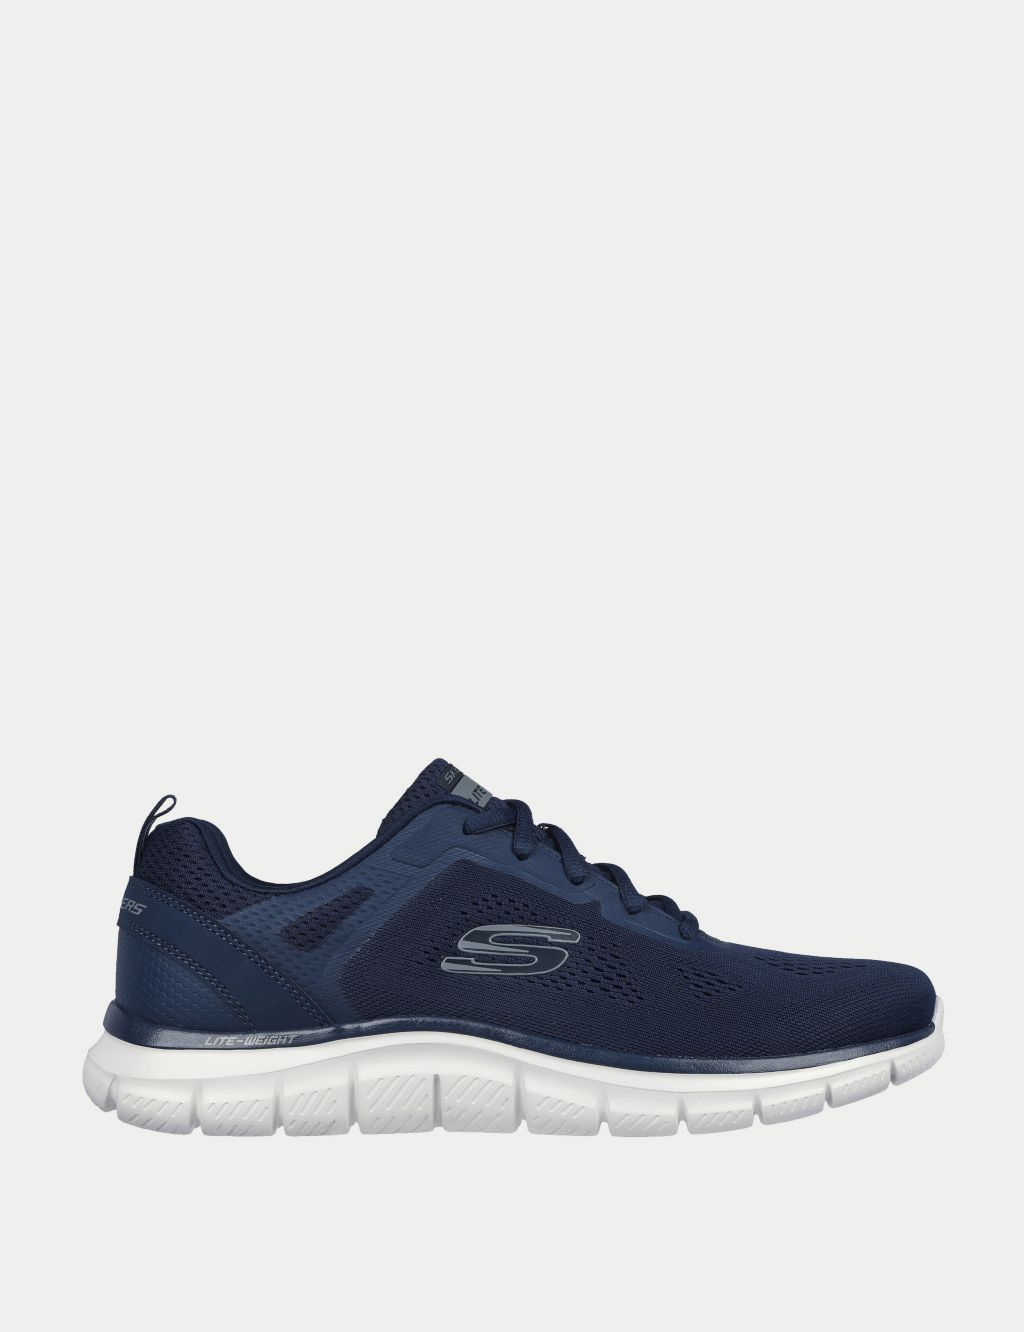 Track Broader Lace Up Trainers image 1